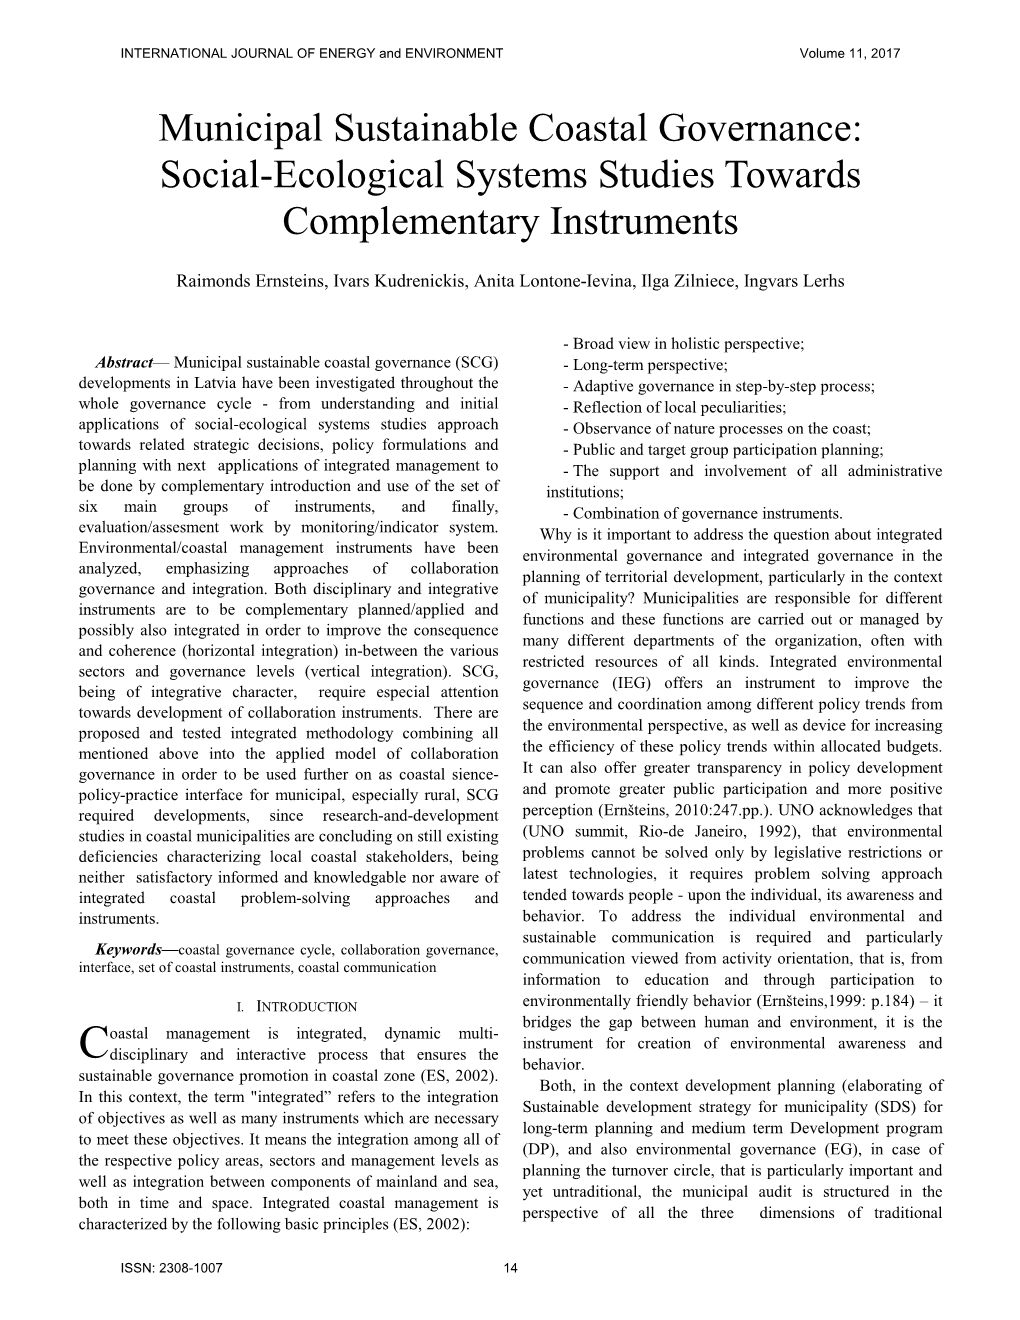 Municipal Sustainable Coastal Governance: Social-Ecological Systems Studies Towards Complementary Instruments